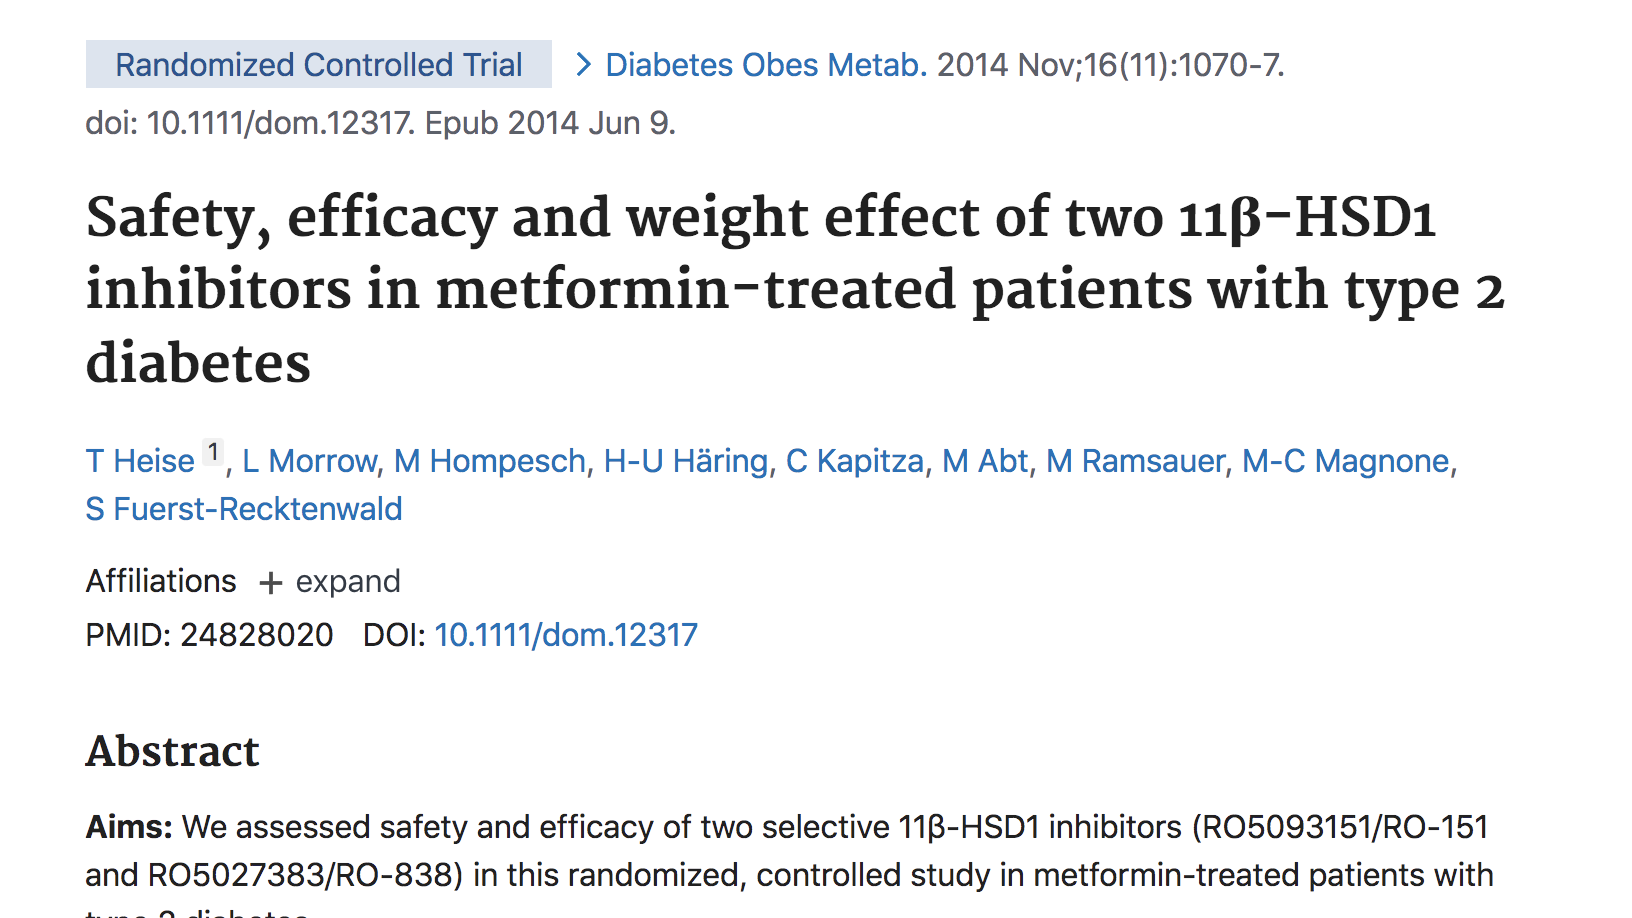 Safety, efficacy and weight effect of two 11β-HSD1 inhibitors in metformin-treated patients with type 2 diabetes thumbnail